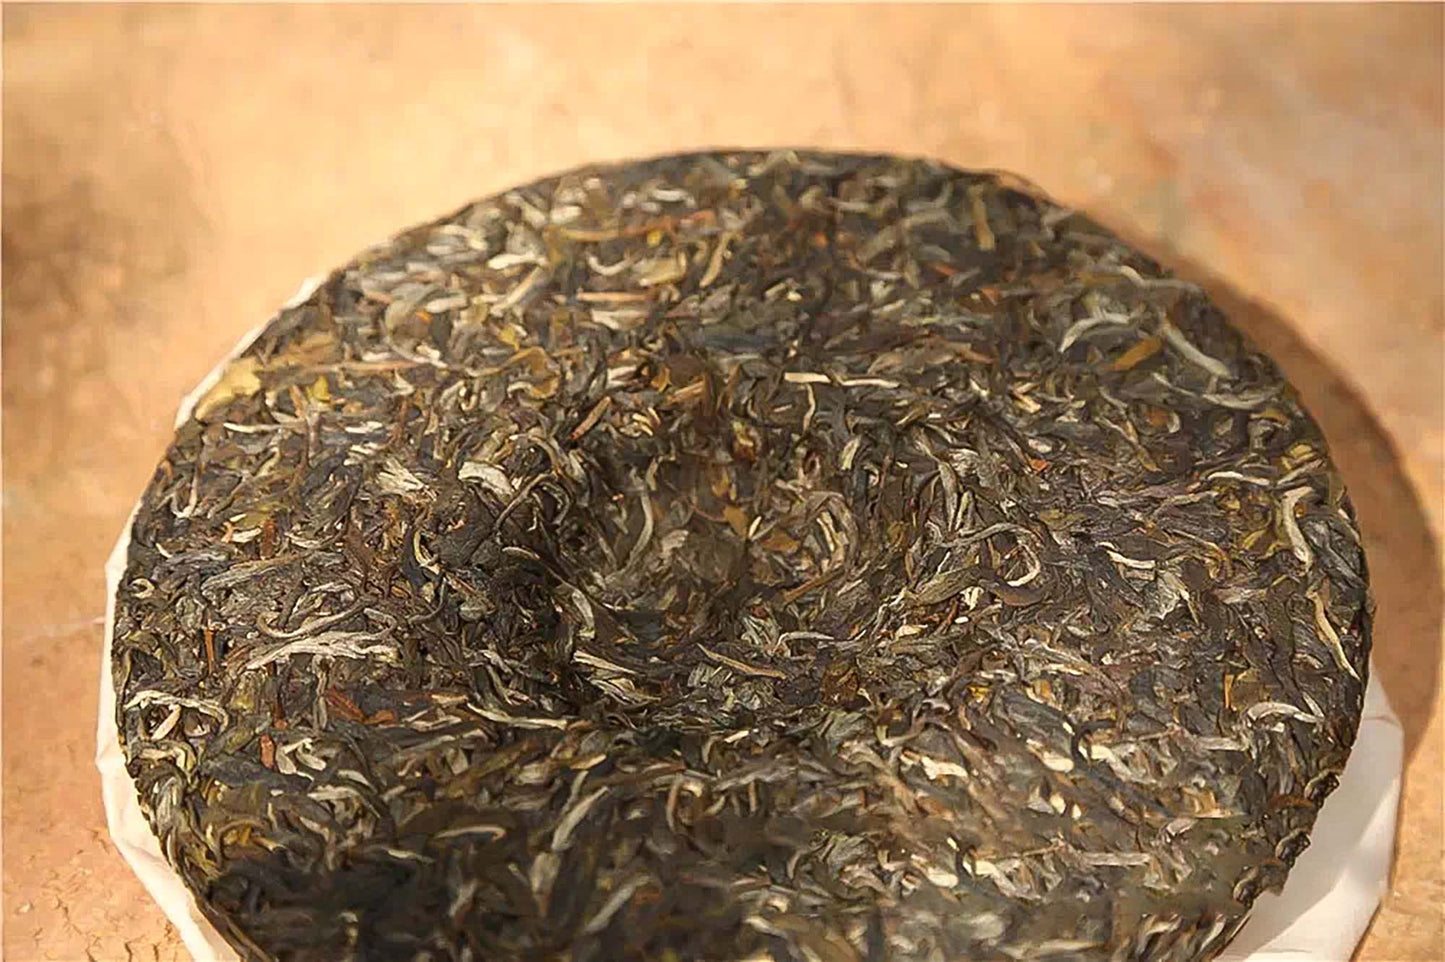 Why Is There A "Little Nest" On a Pu-erh Tea Cake?